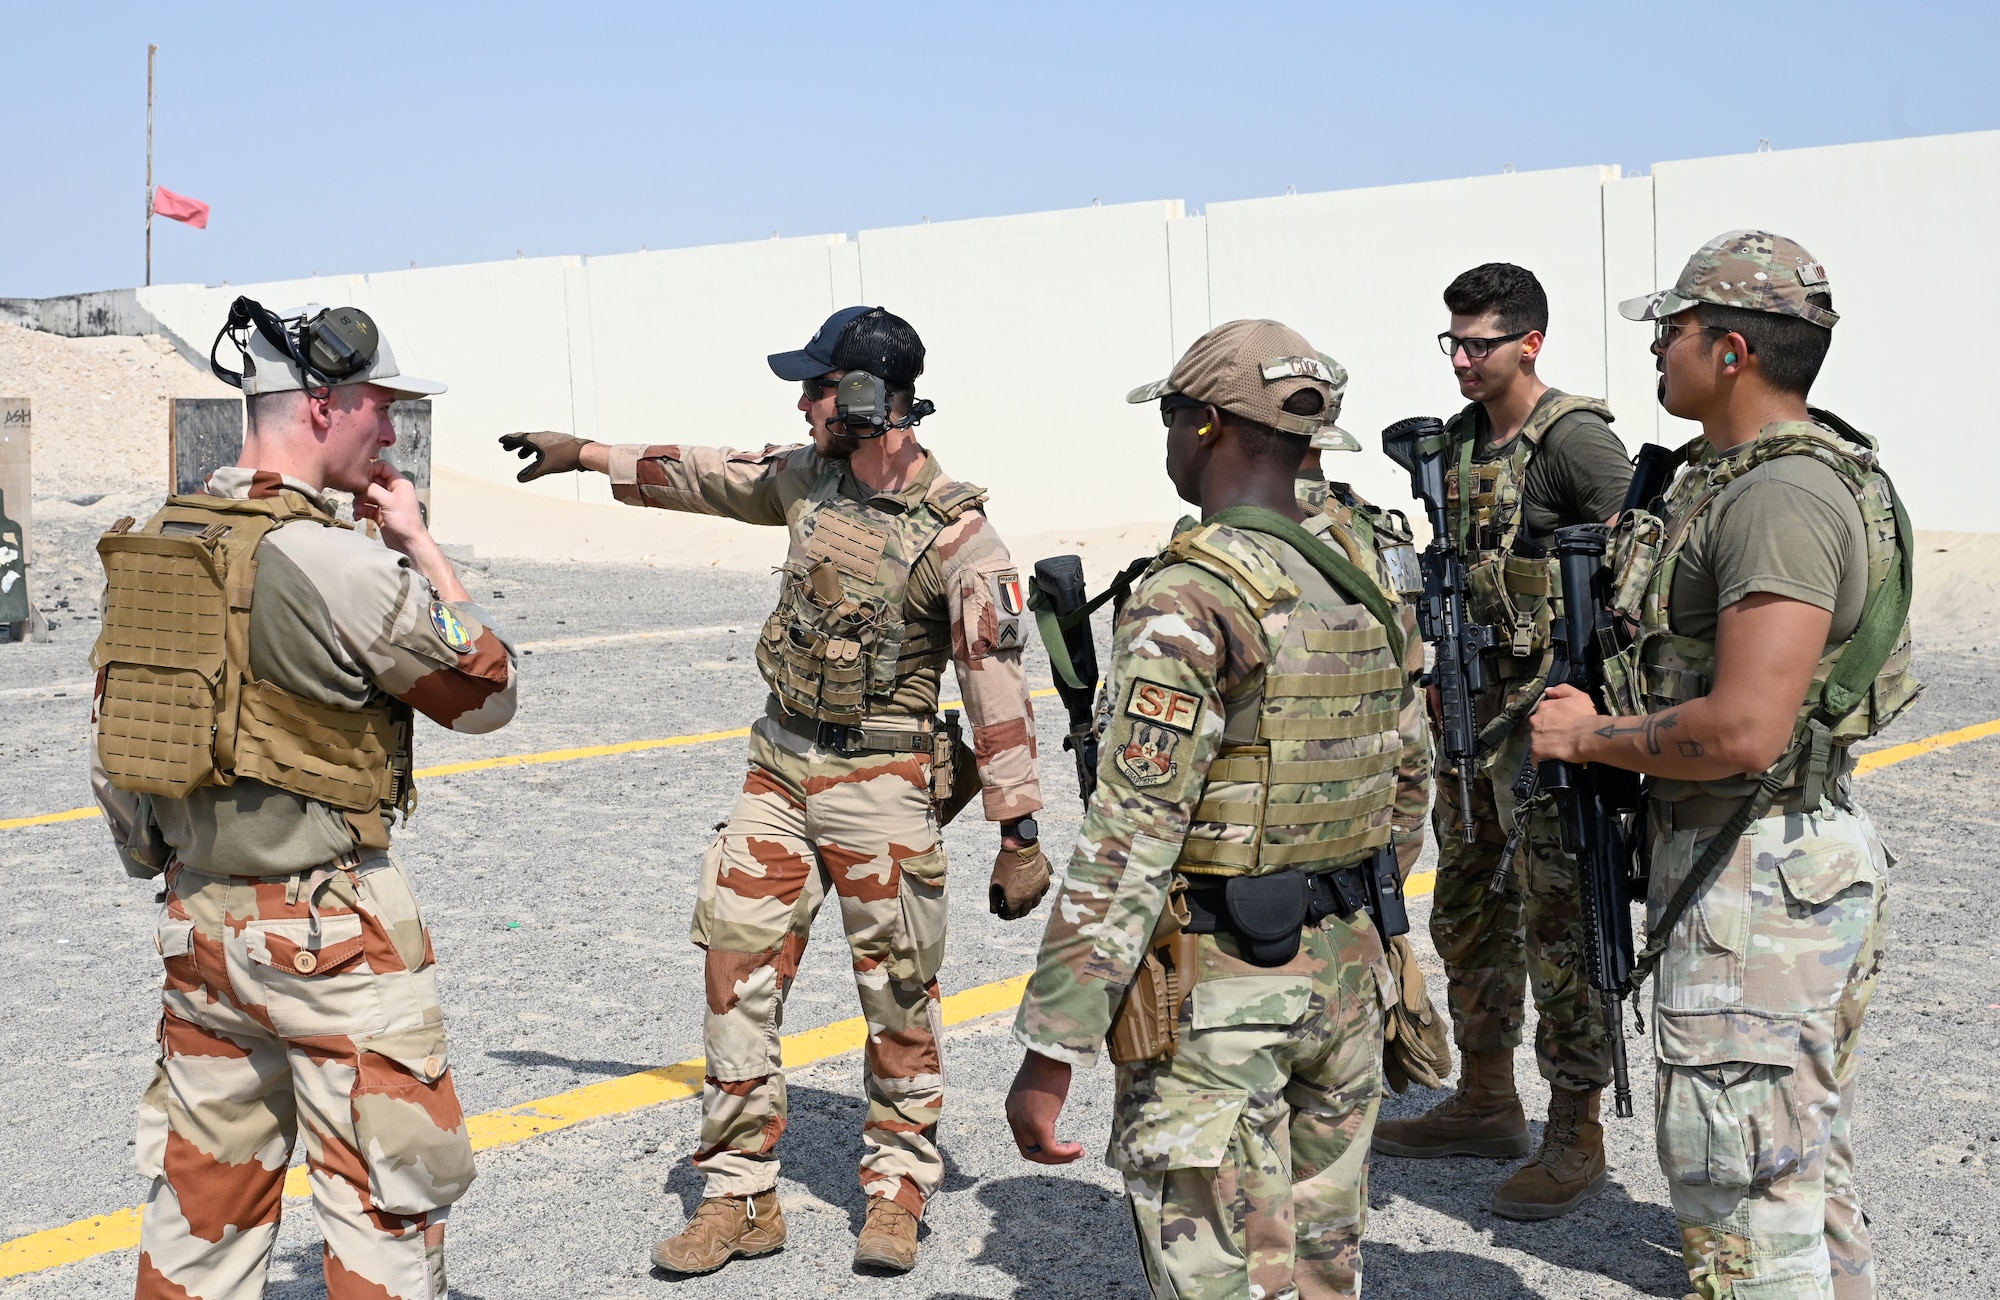 A photo of French and U.S. personnel discussing the range.